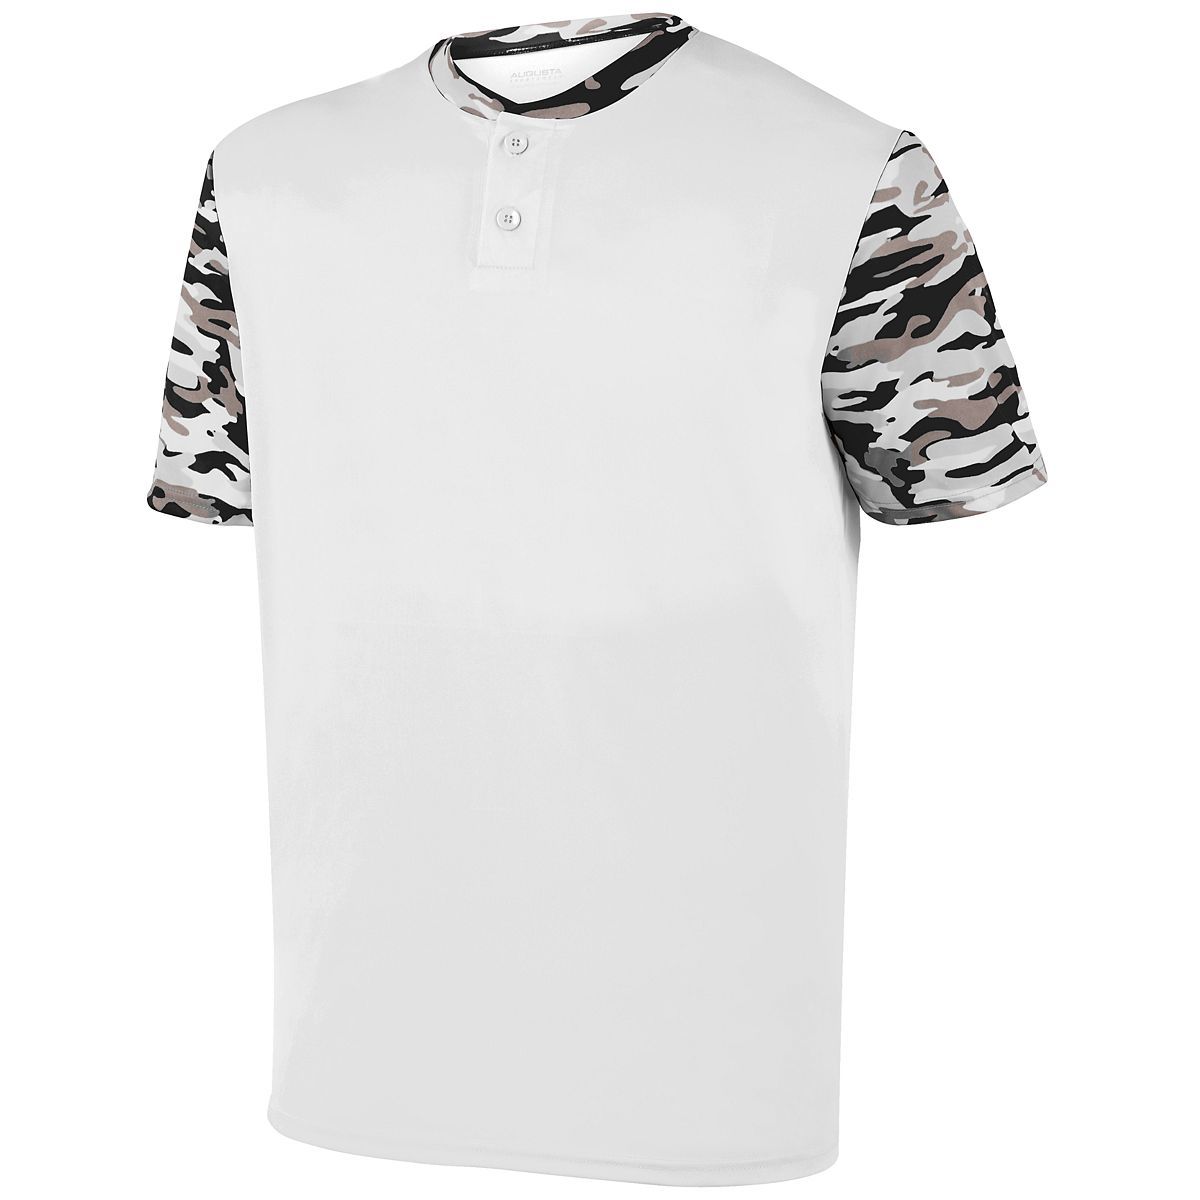 Augusta Sportswear Pop Fly Jersey in White/Black Mod  -Part of the Adult, Adult-Jersey, Augusta-Products, Baseball, Shirts, All-Sports, All-Sports-1 product lines at KanaleyCreations.com